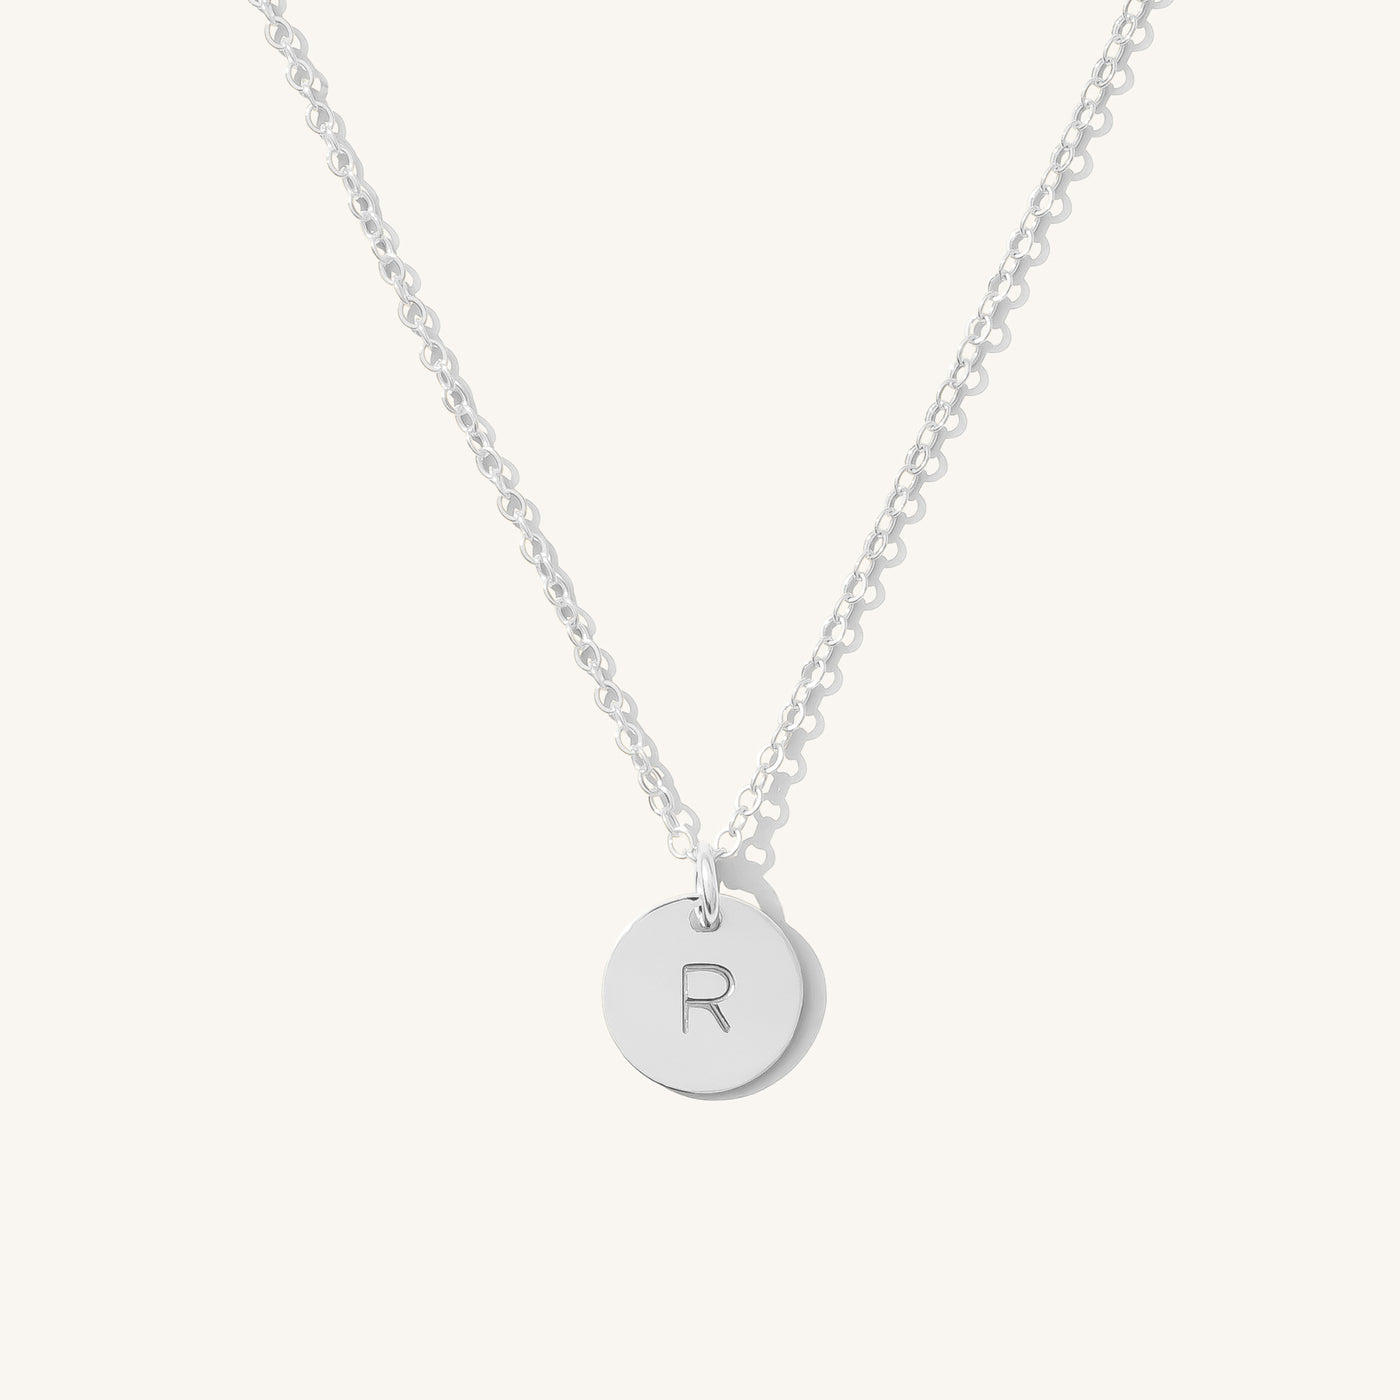 R Dainty Initial Necklace